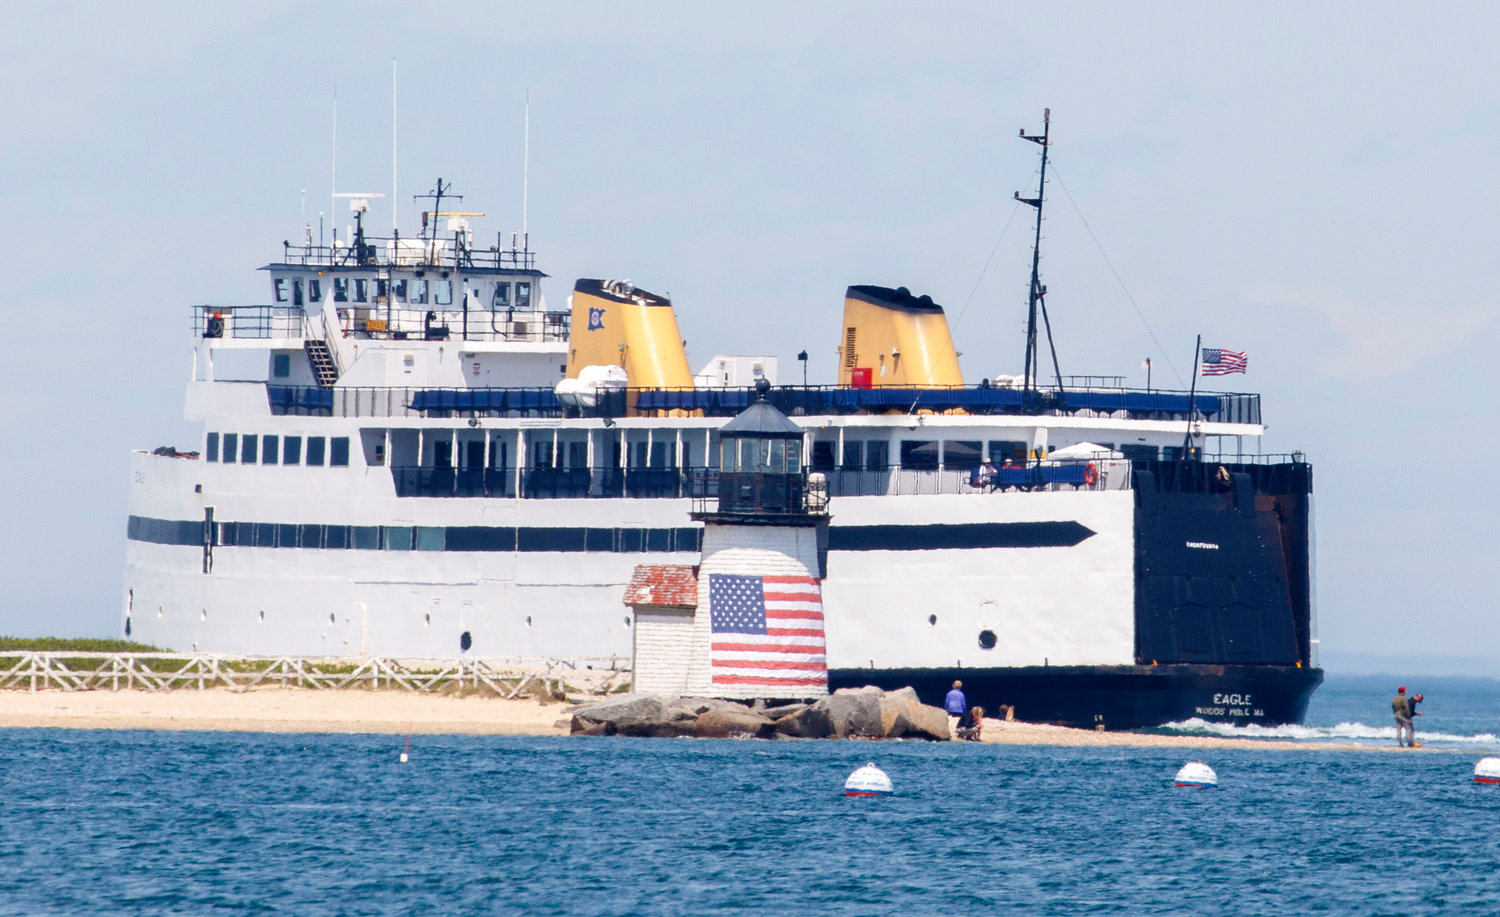 Photo by Nicole Harnishfeger.The M/V Eagle rounds Brant Point Lighthouse enroute to Hyannis. May 4, 2020.